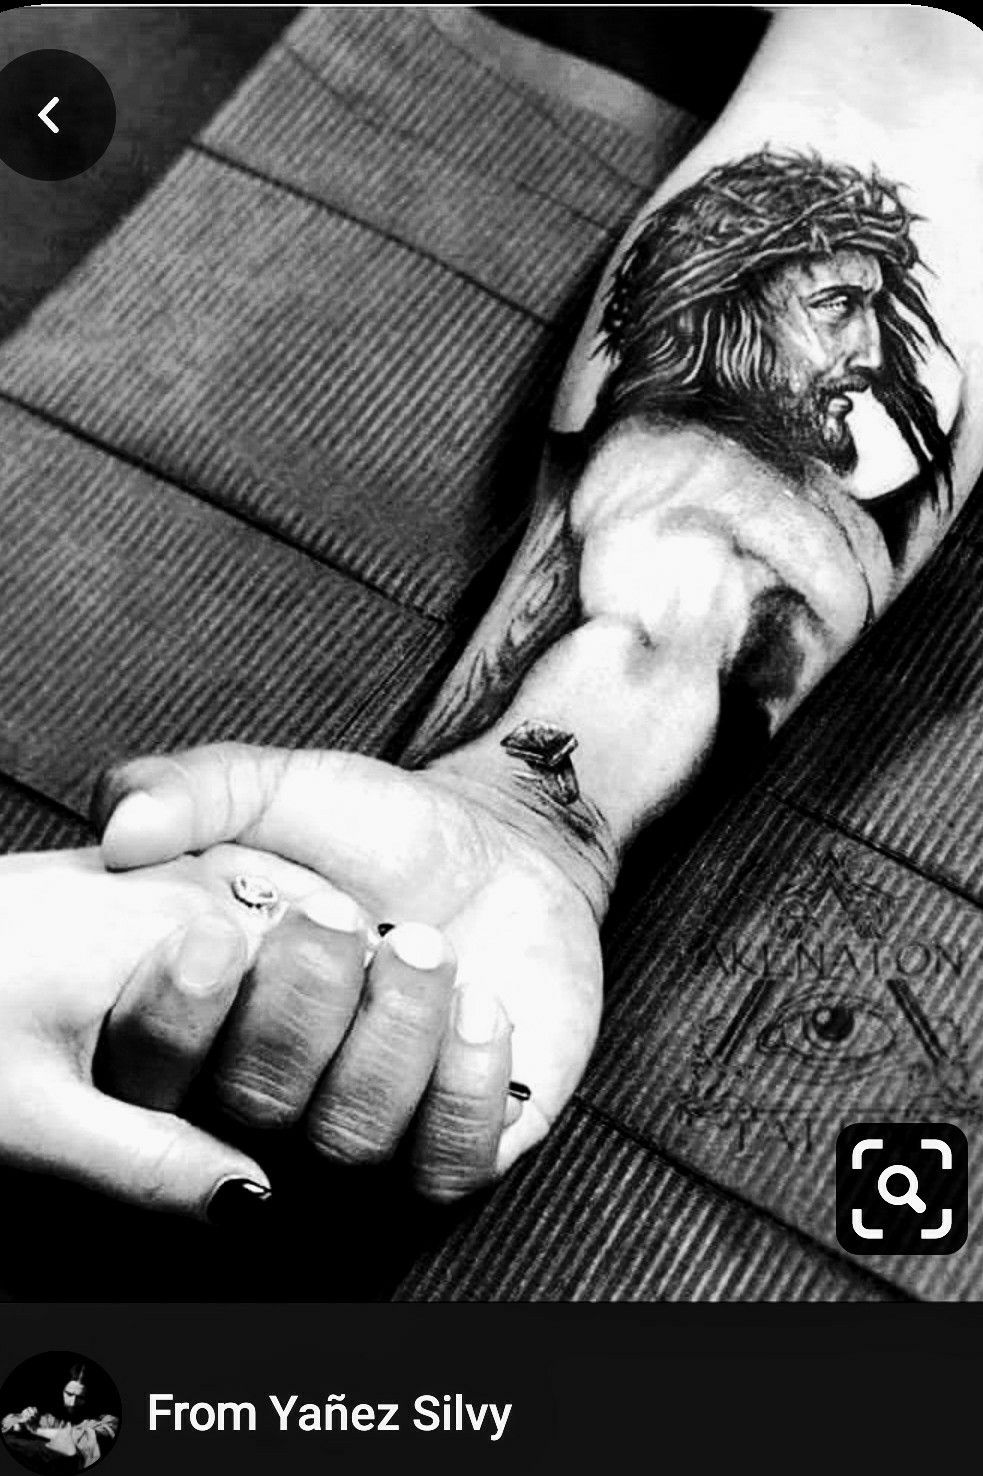 Jesus Christ on a Cross Tattoo  nail in real persons wrist  rtattoo